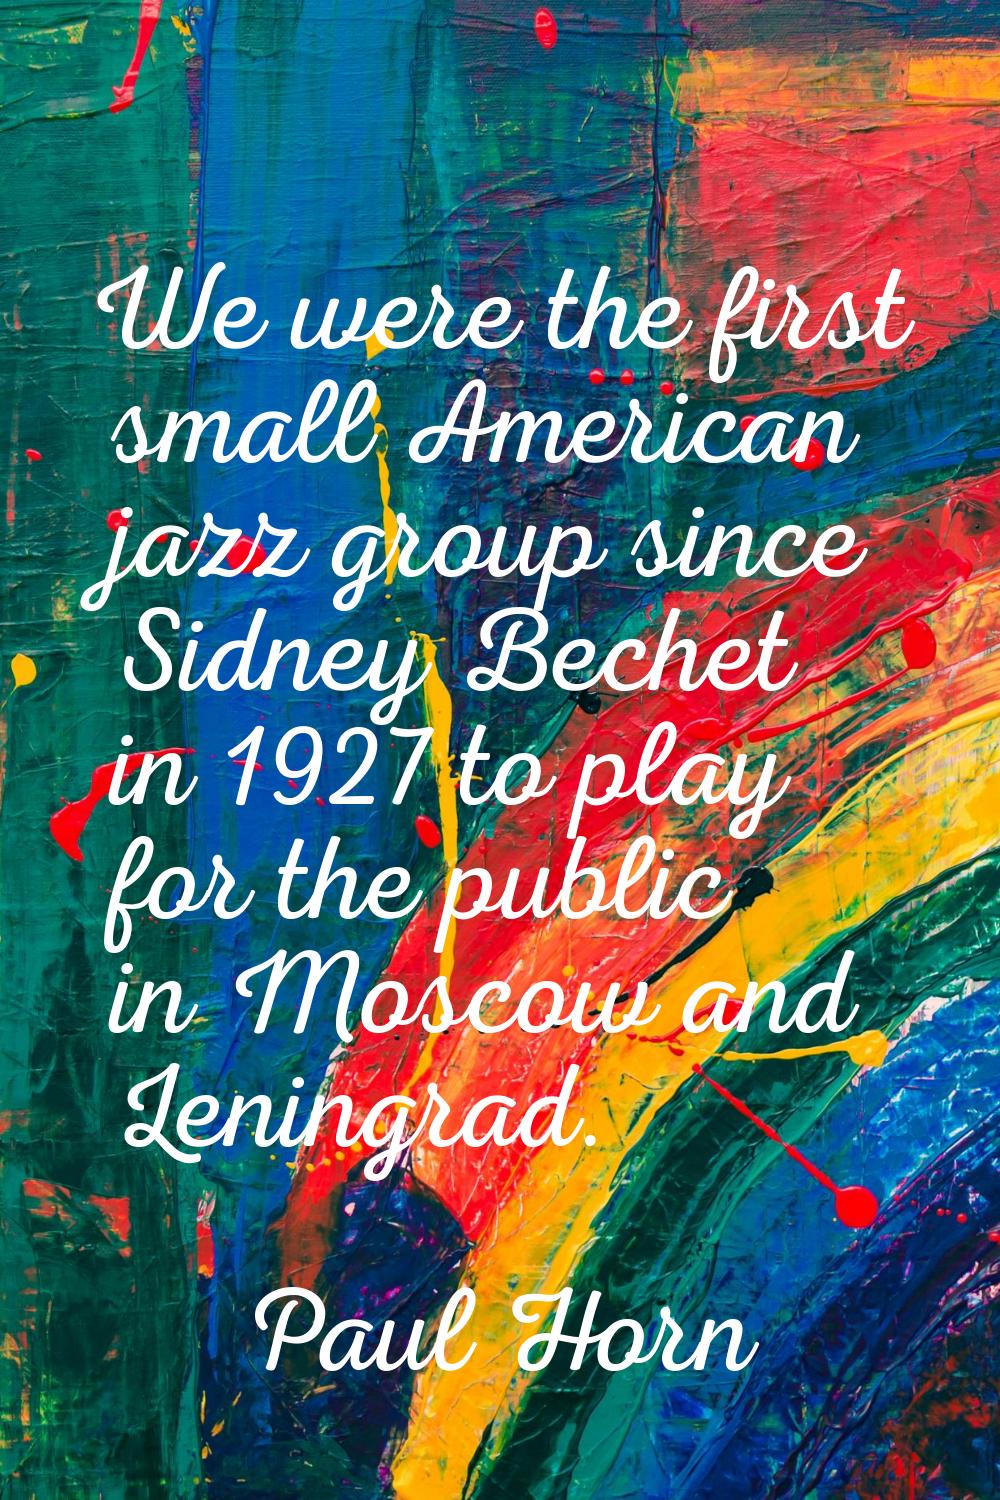 We were the first small American jazz group since Sidney Bechet in 1927 to play for the public in M